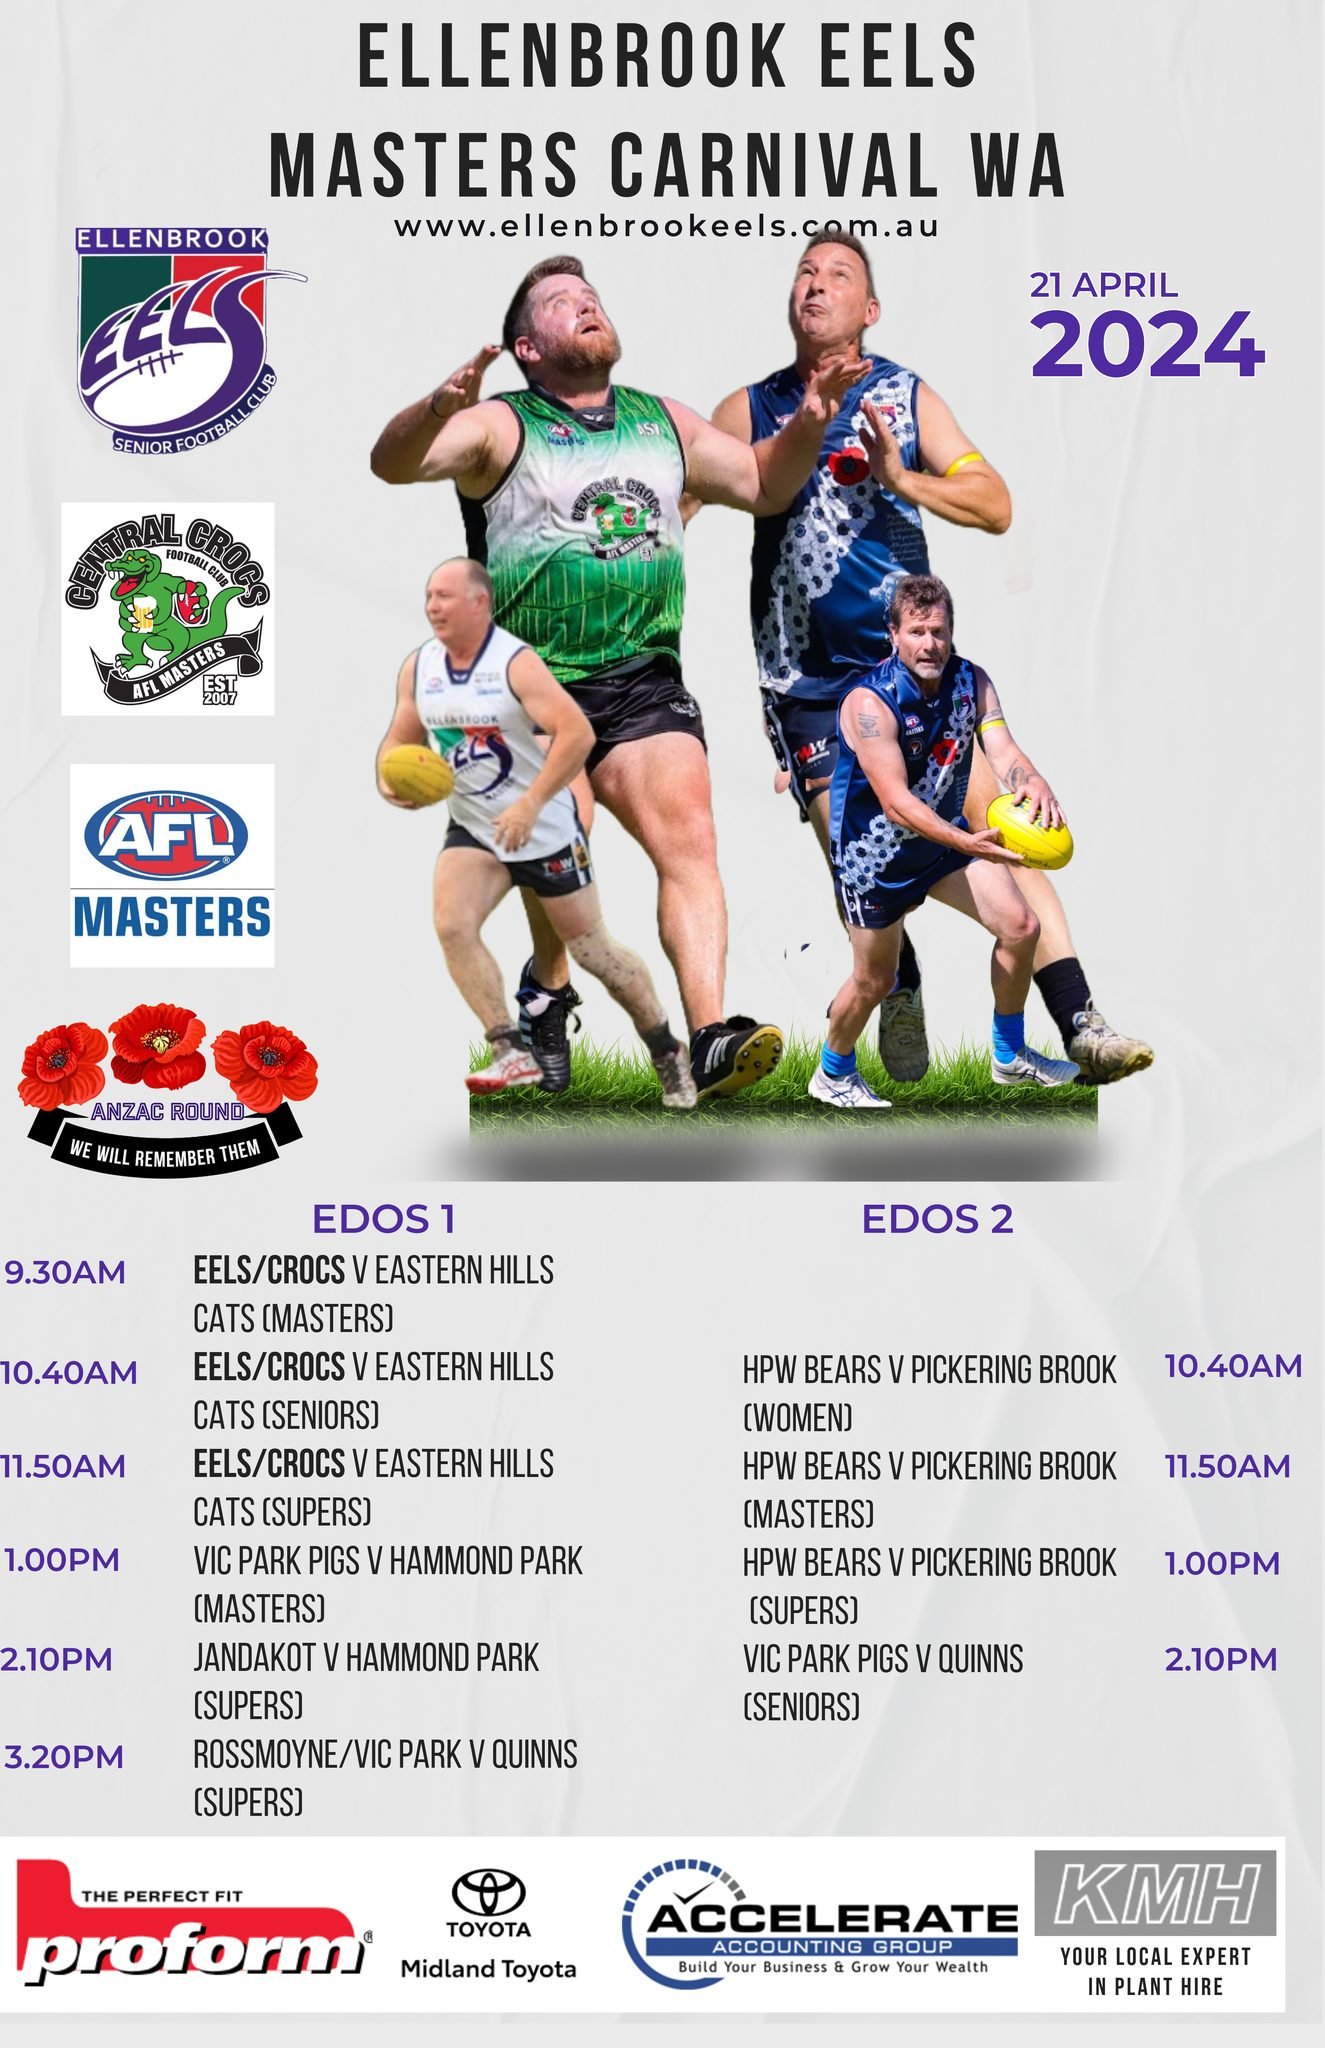 The Ellenbrook Eels, with our friends the Central Crocs Football Club - AFL Masters, are hosting the AFL Masters Western Australia this Sunday at the EDOS. 

A huge day of footy, with an action packed fixture sure to keep you entertained. Plenty to d